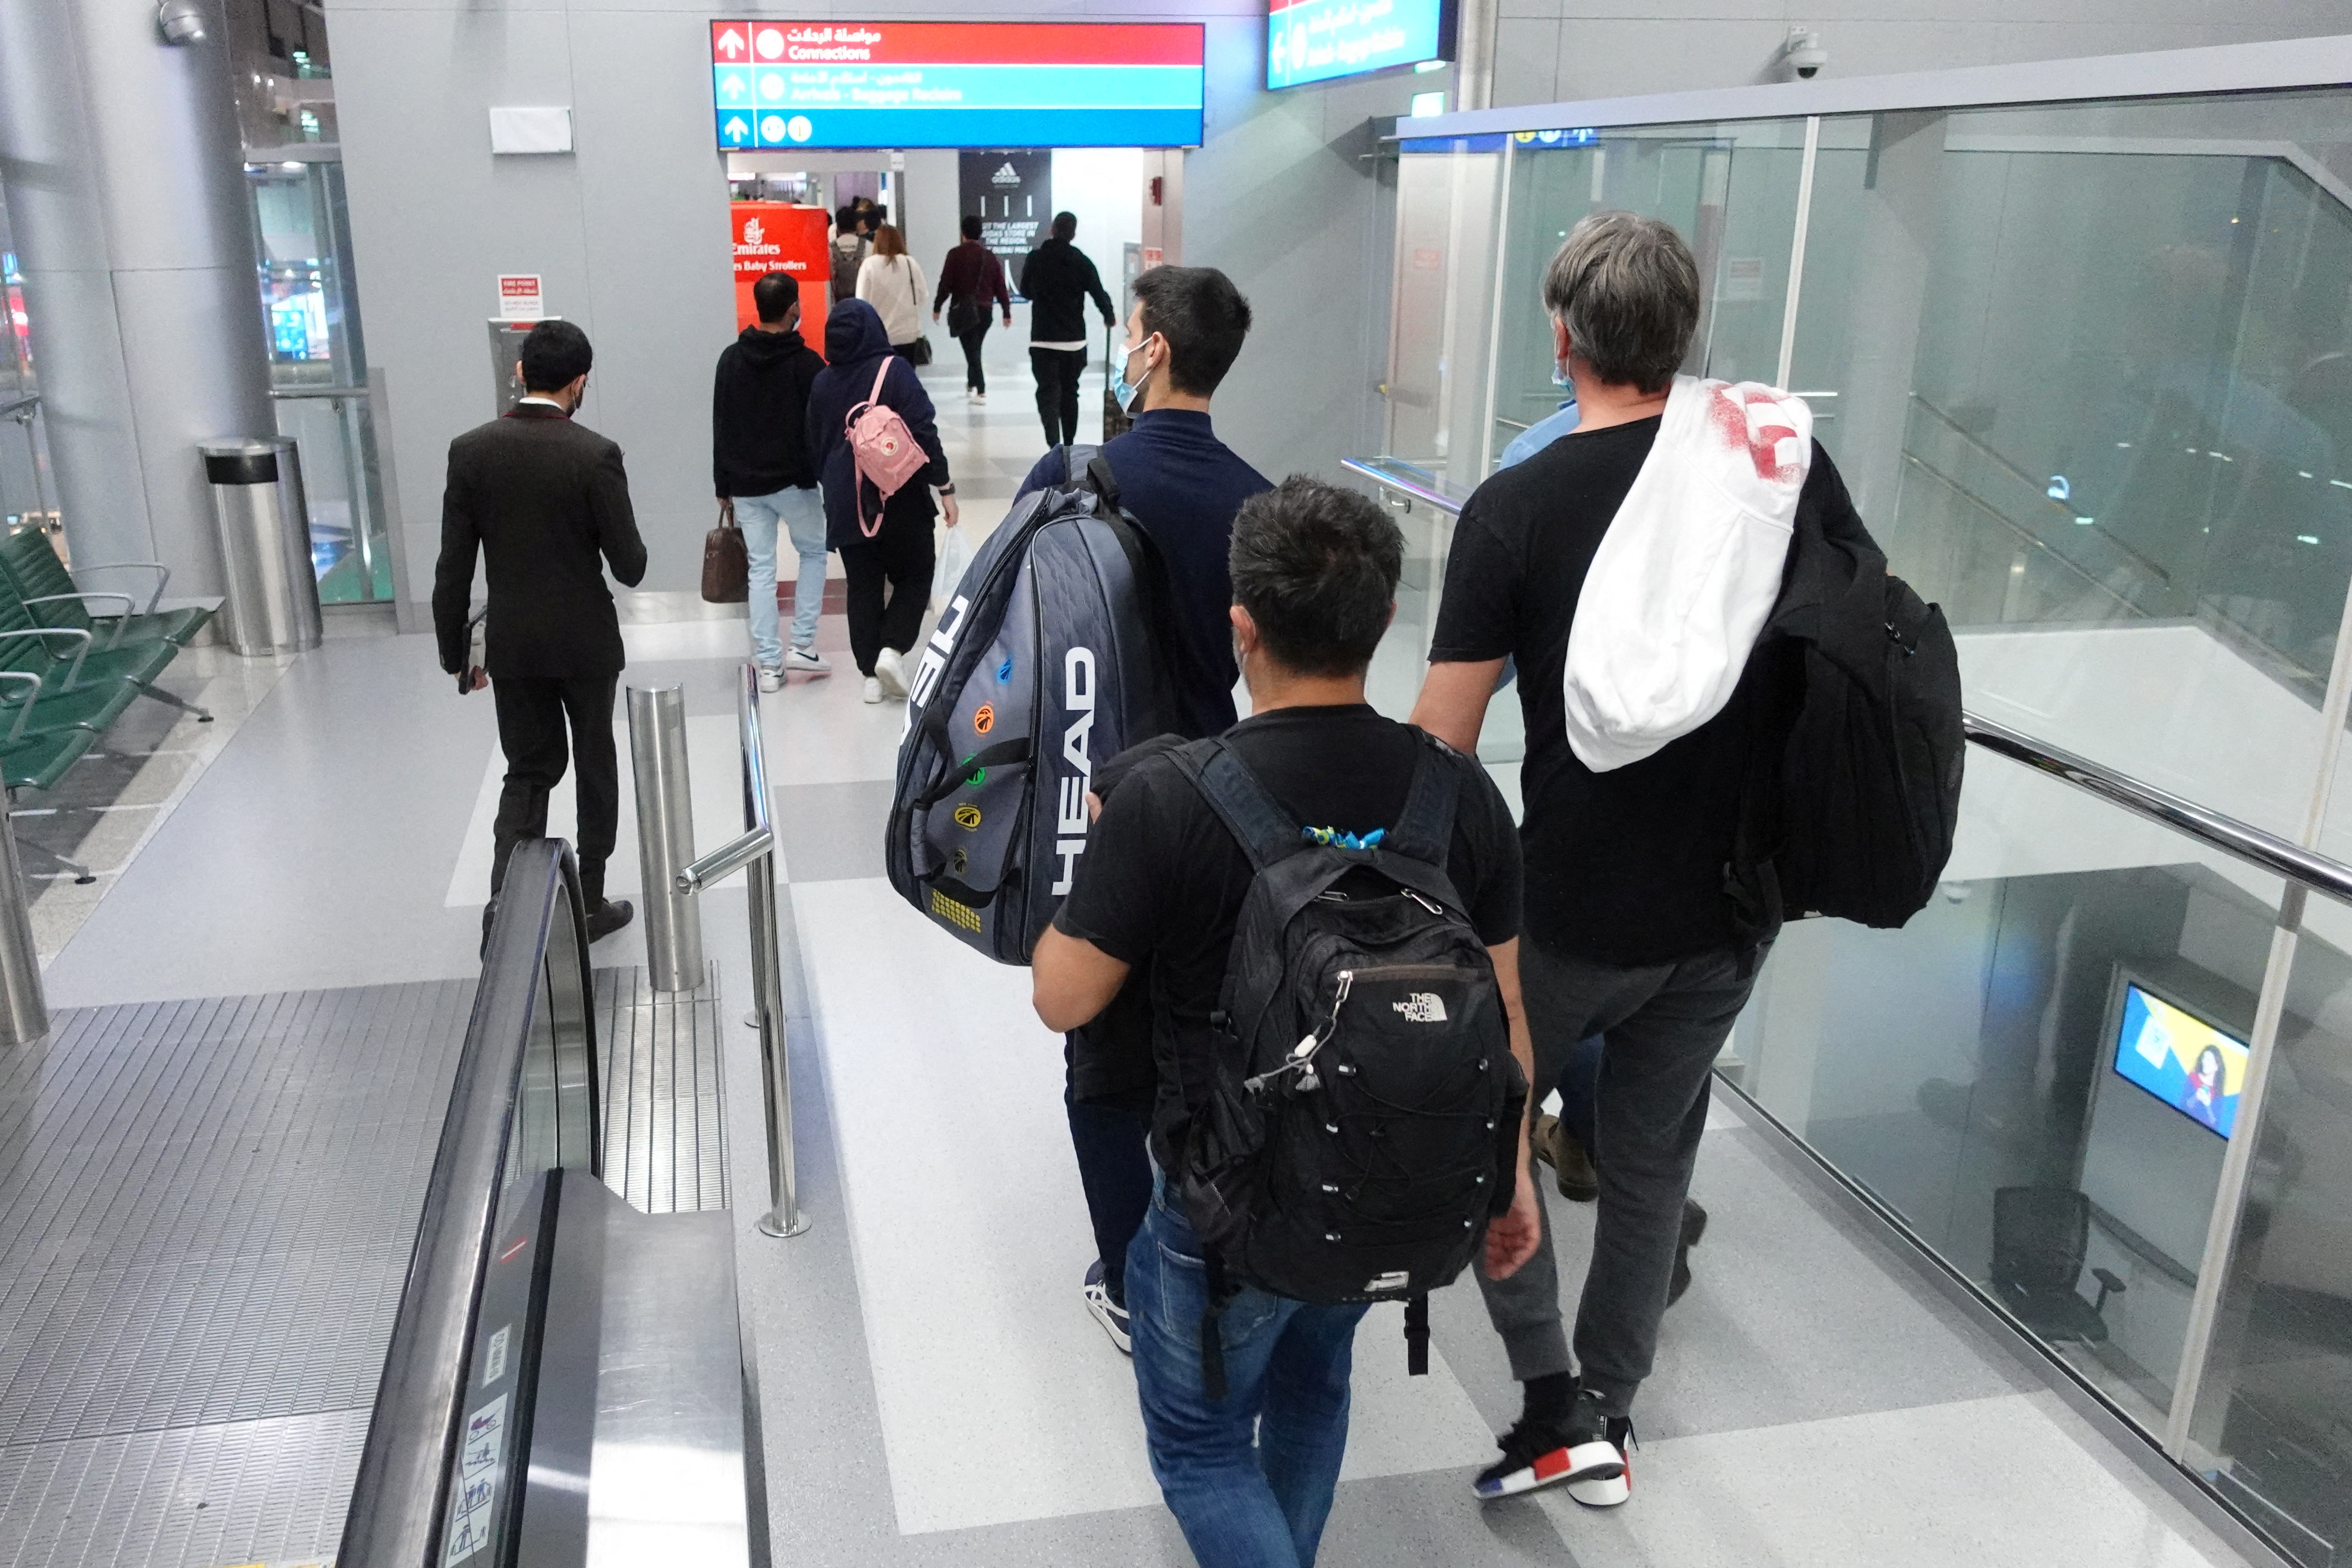 Serbian tennis player Novak Djokovic walks with his team after landing at Dubai Airport after the Australian Federal Court upheld a government decision to cancel his visa to play in the Australian Open, in Dubai, United Arab Emirates, January 17, 2022. REUTERS/Loren Elliott